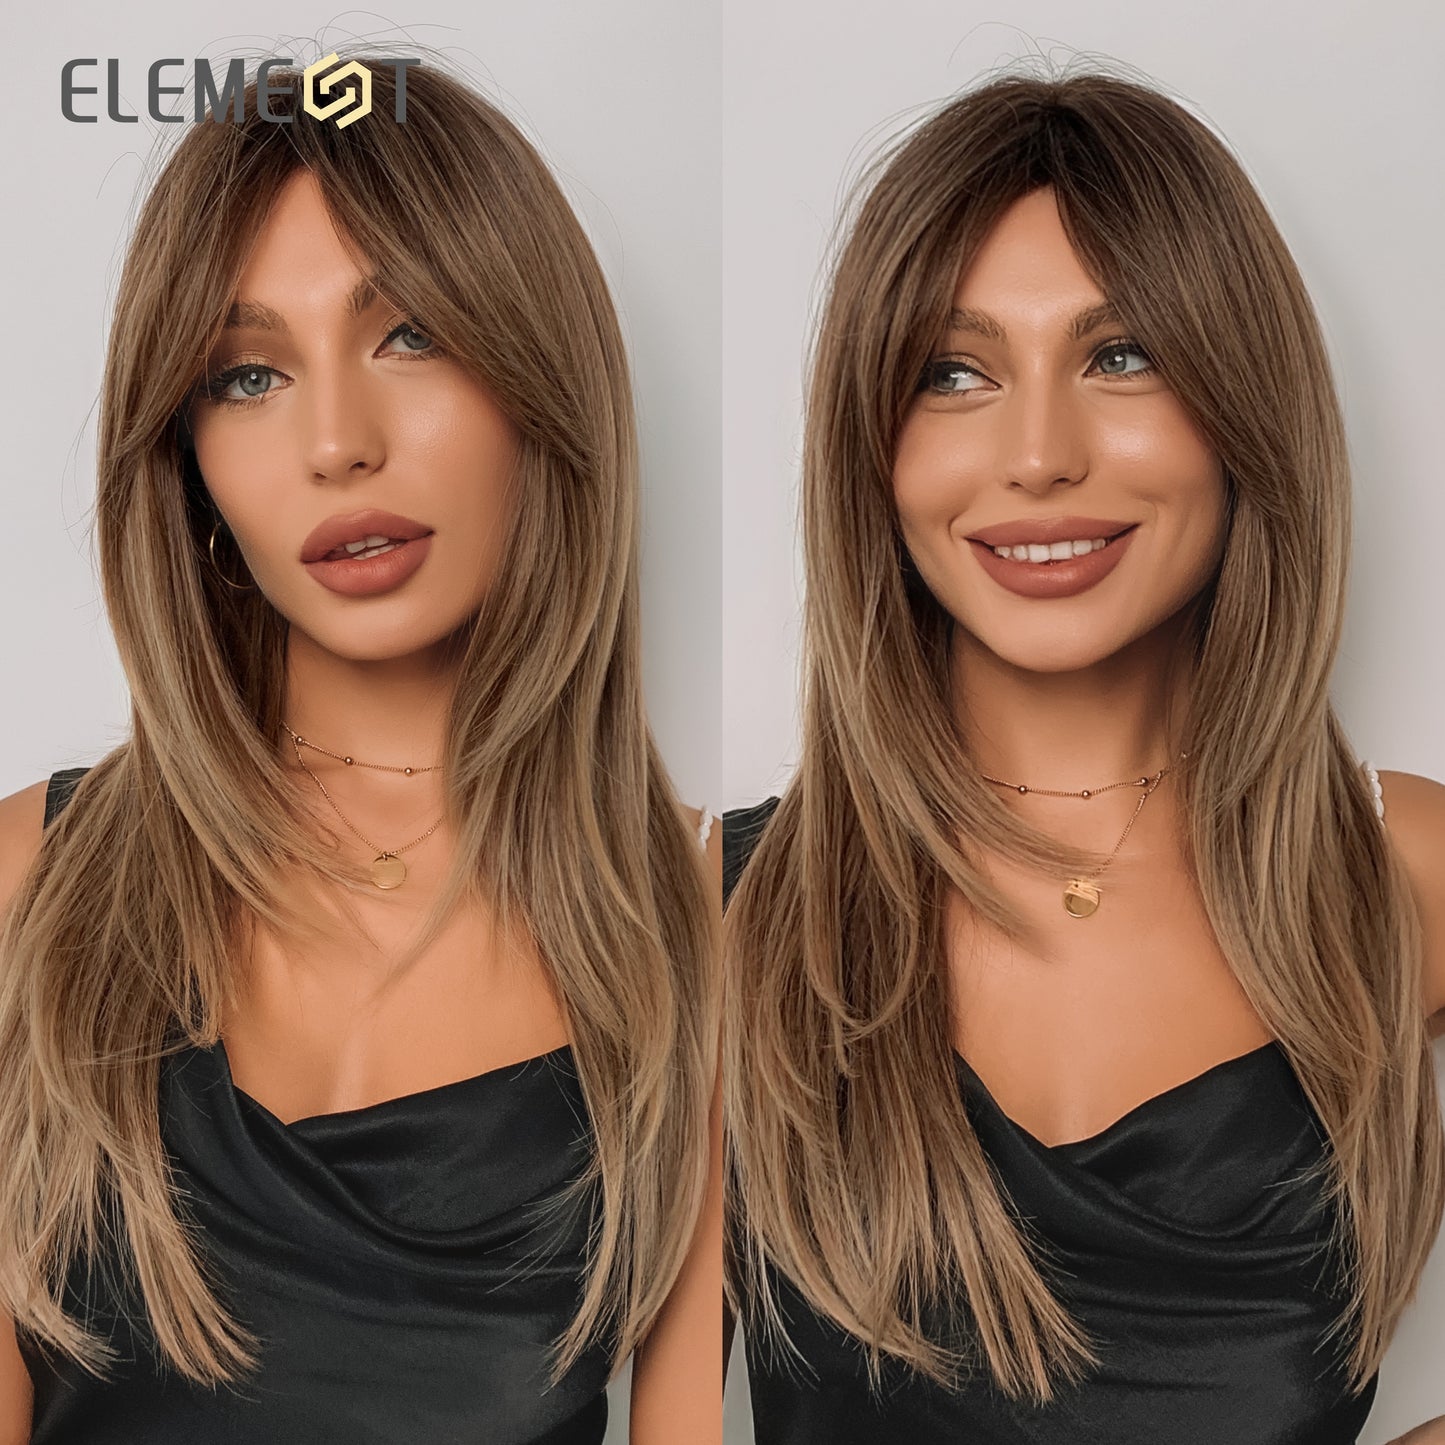 Element Synthetic Fiber Wigs for Women Long Straight Wavy Brown Blonde Wig with Bangs Heat Resistant Fashion Natural Daily Party